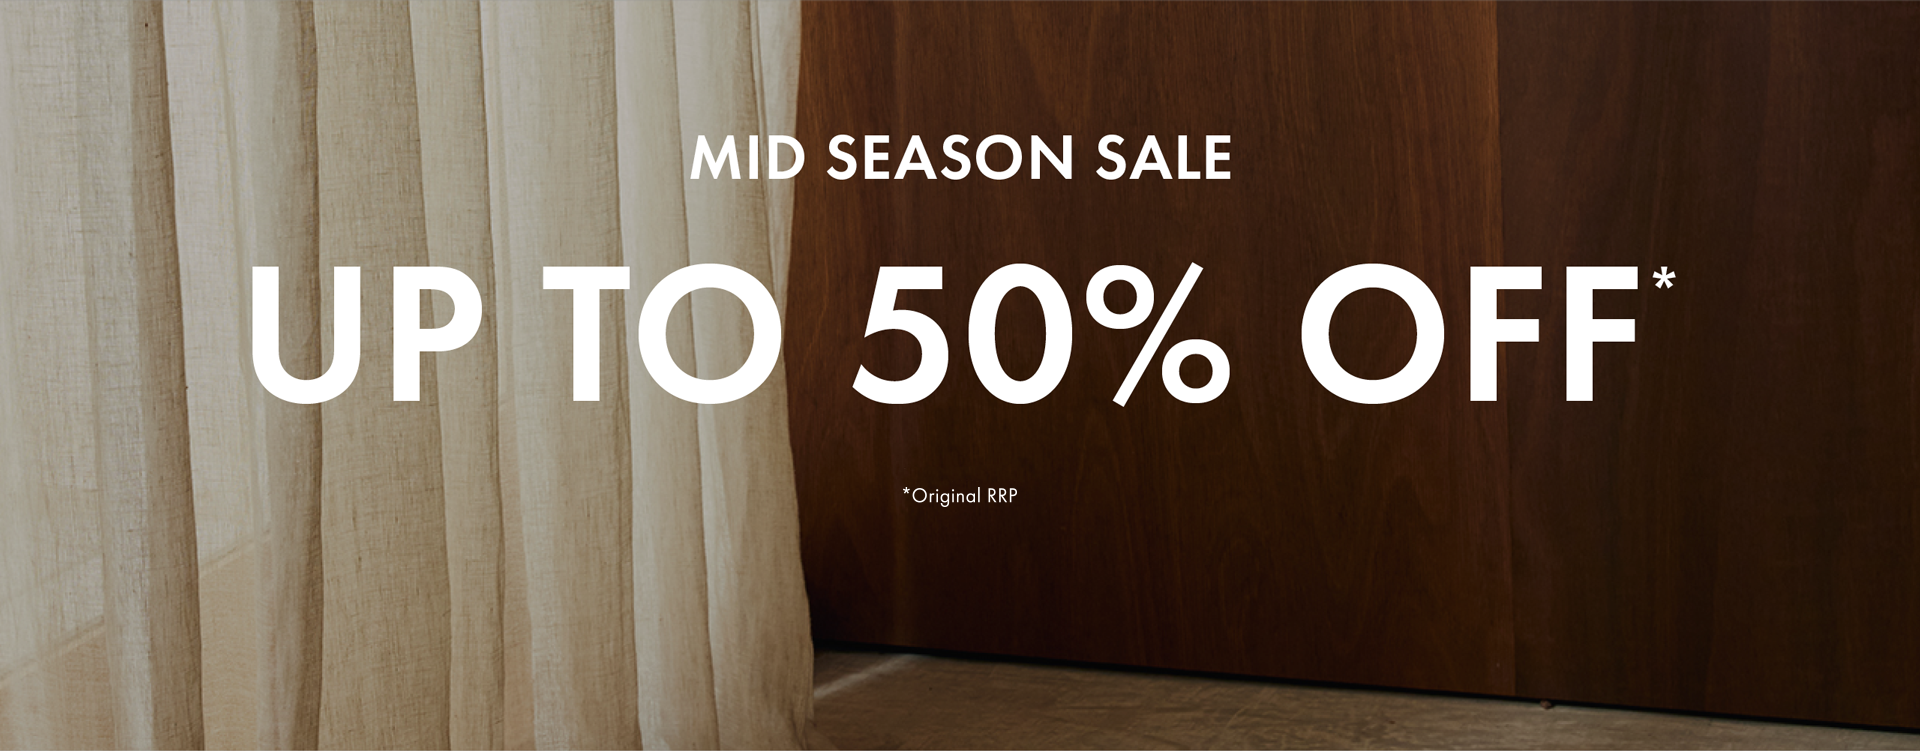 Mid Season Sale - Up to 50% off*